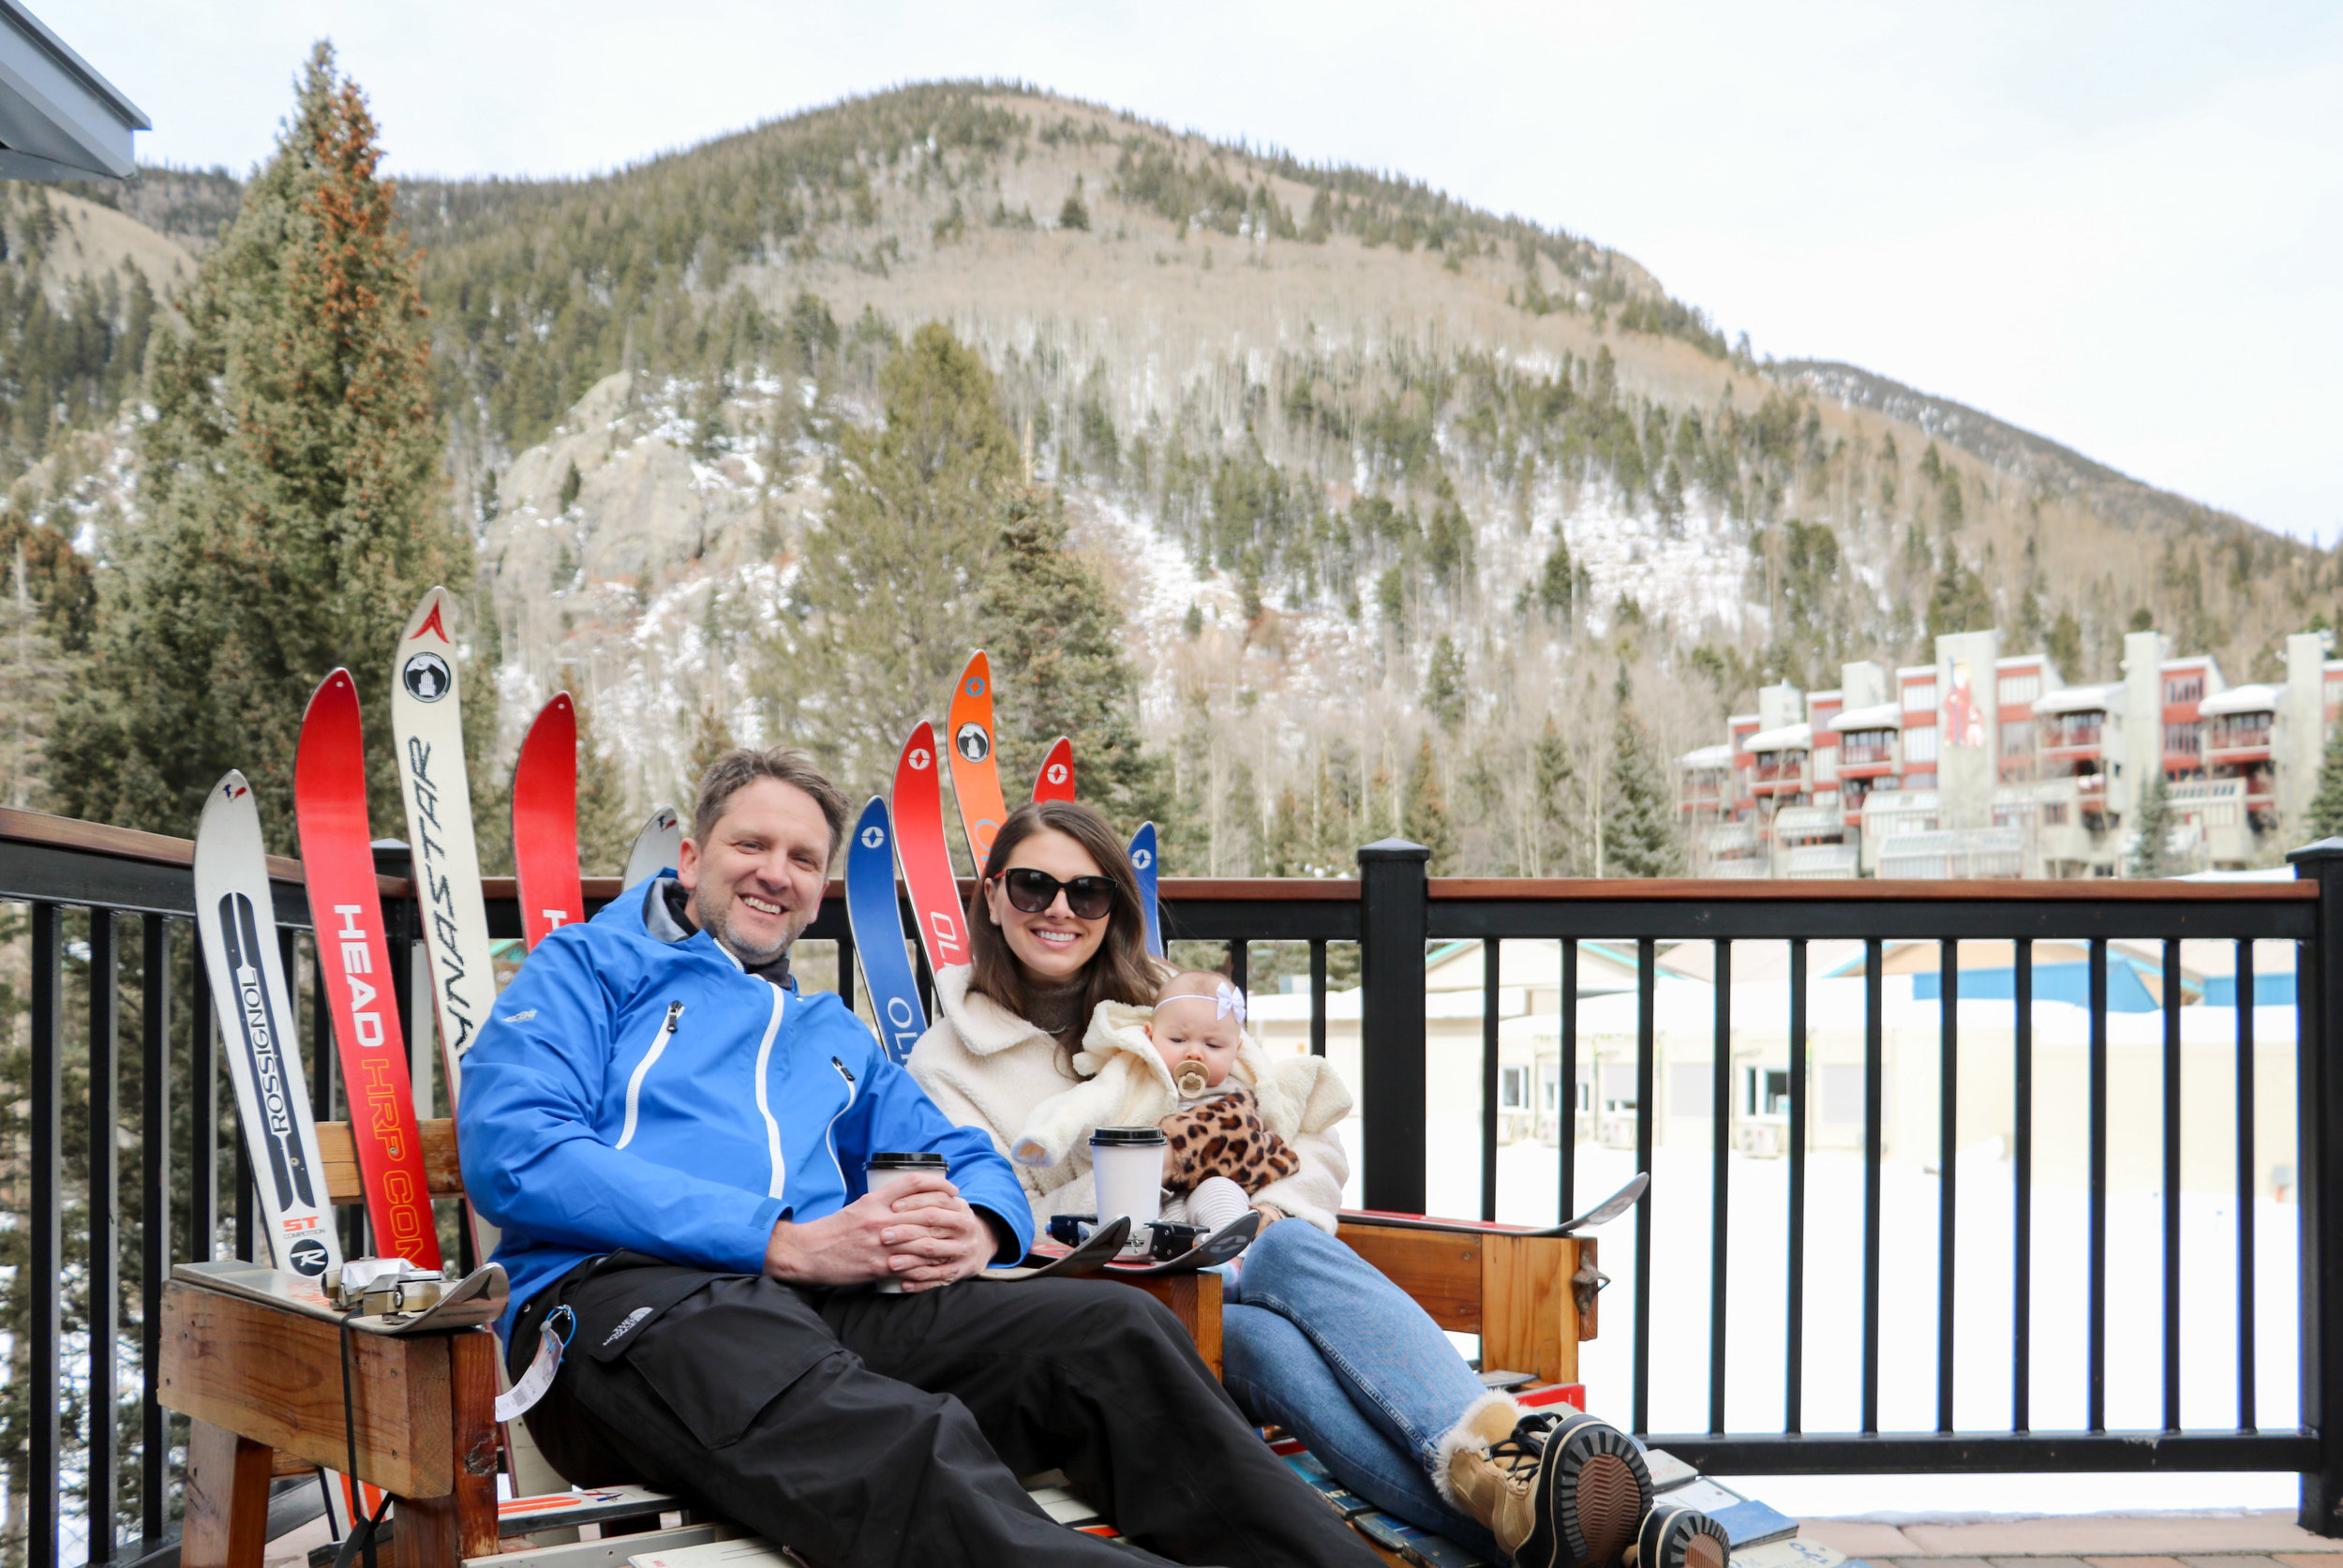 The Complete Travel Guide to Taos Ski Valley, New Mexico